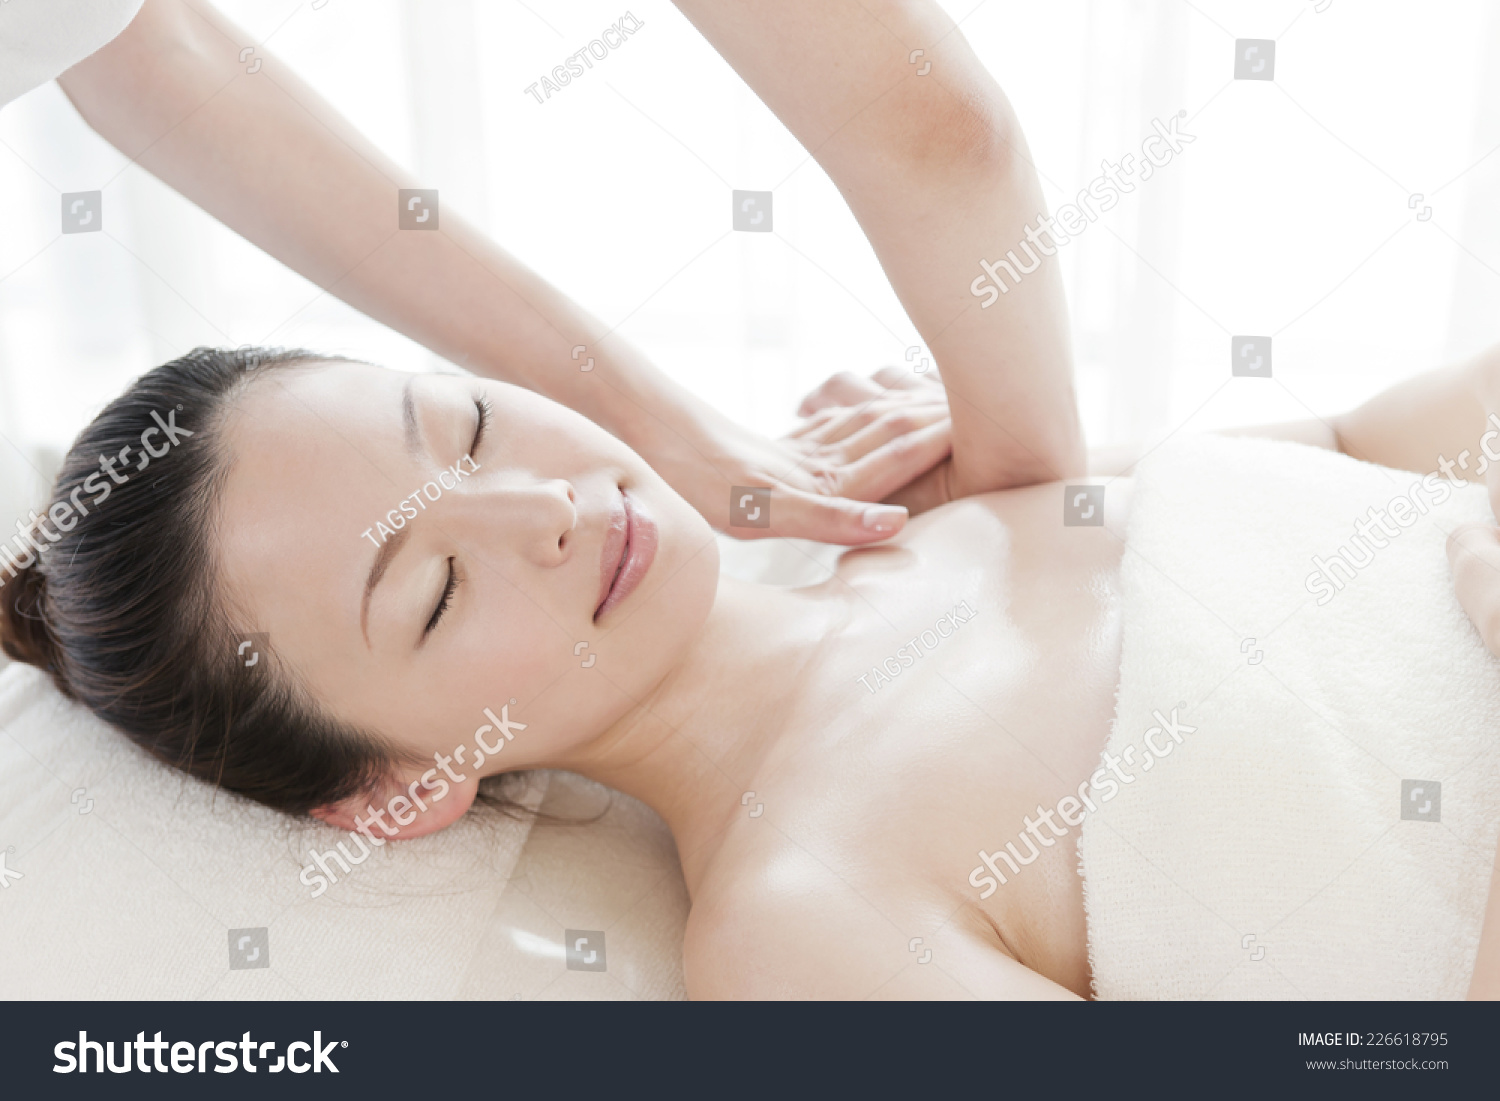 Japanese Woman Receiving Oil Massage image